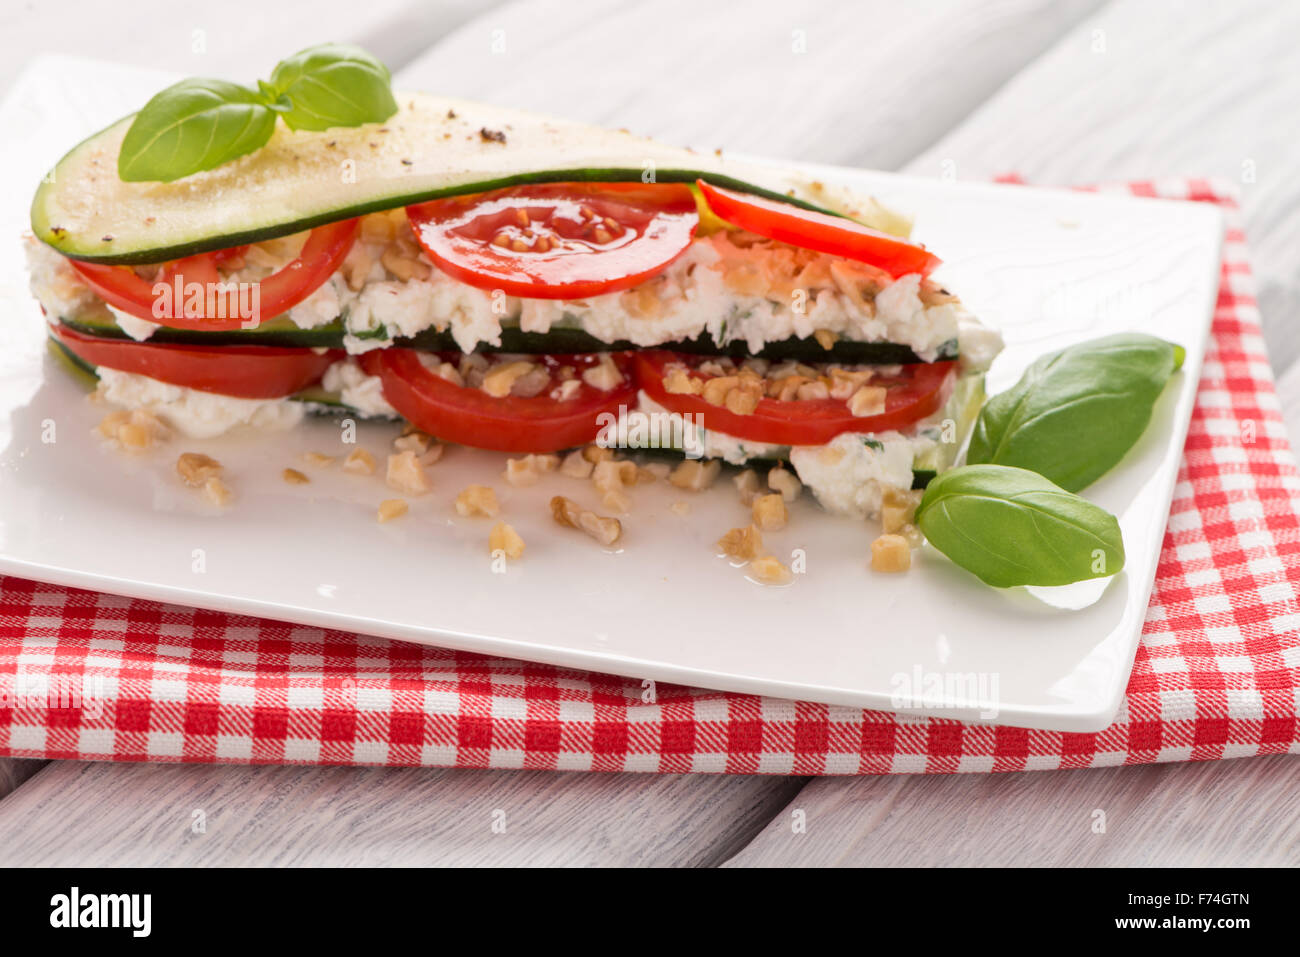 Delicious Italian appetizer of tomato, zucchini slices, nuts, basil and fresh cheese. Stock Photo